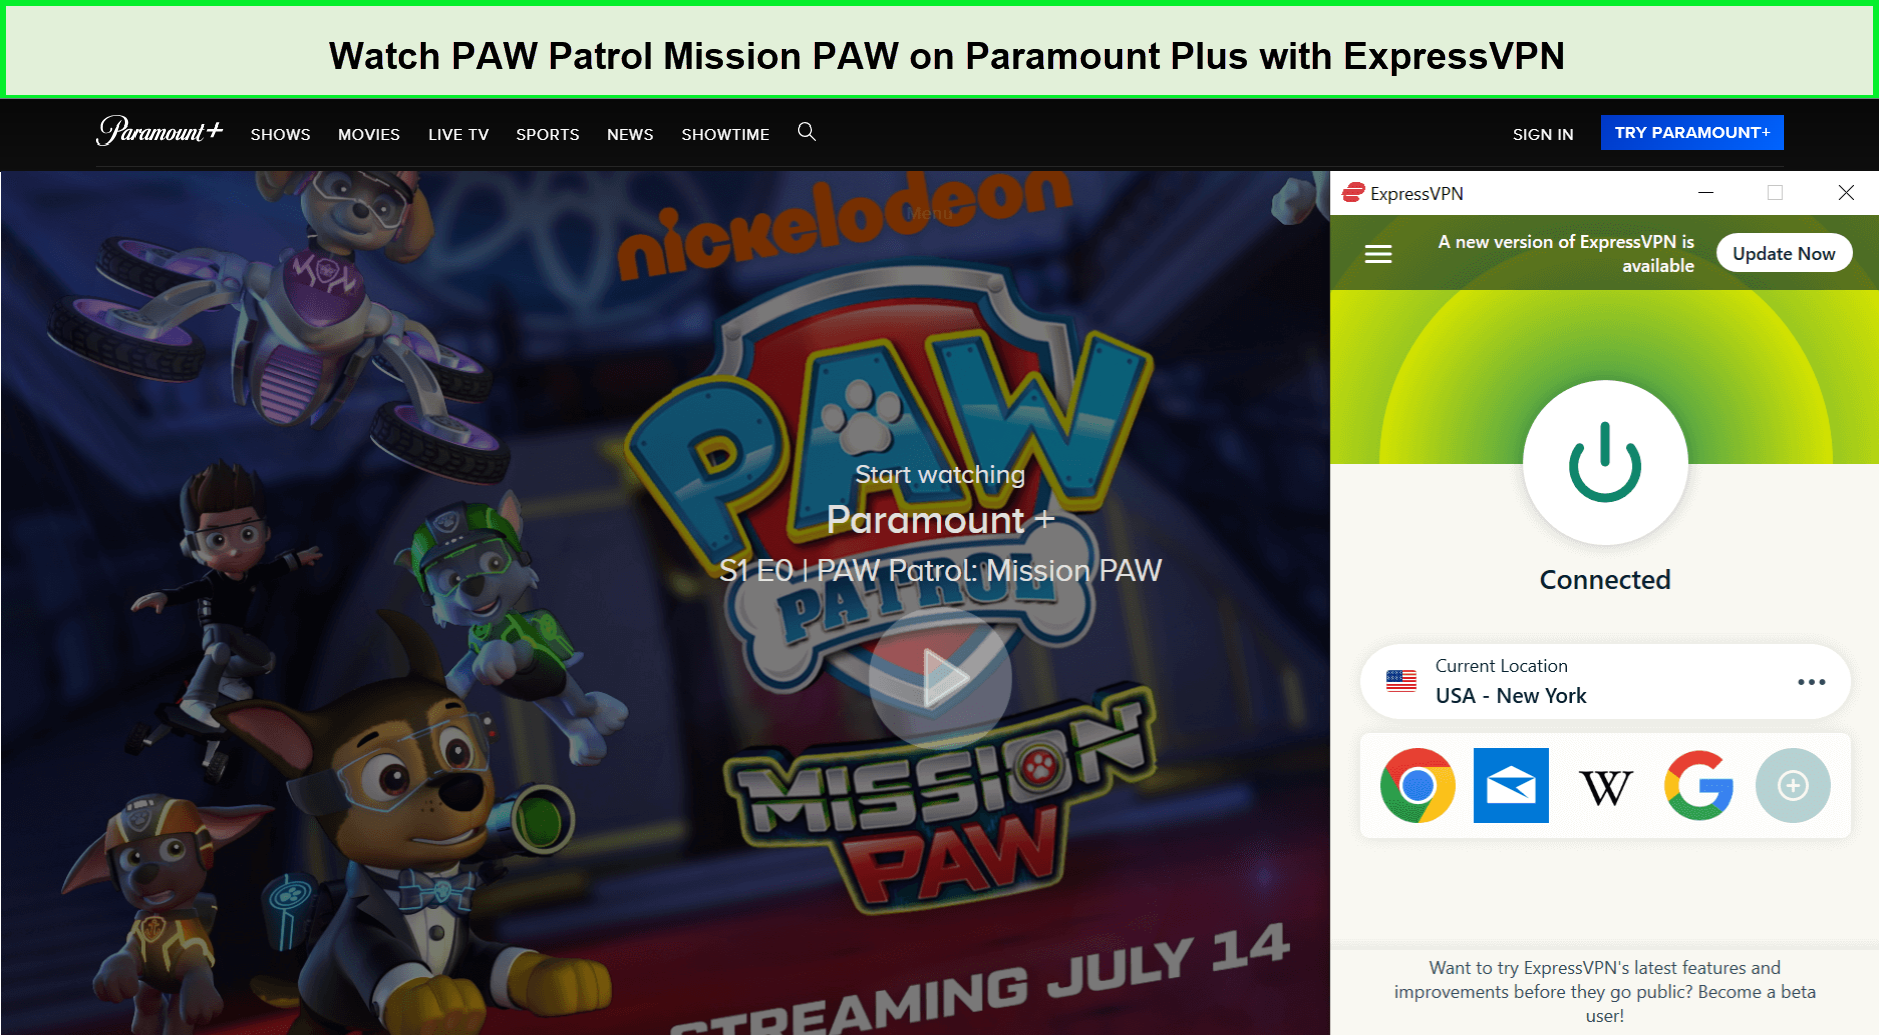 Watch-PAW-Patrol-Mission-PAW-in-India-on-Paramount-Plus-with-ExpressVPN